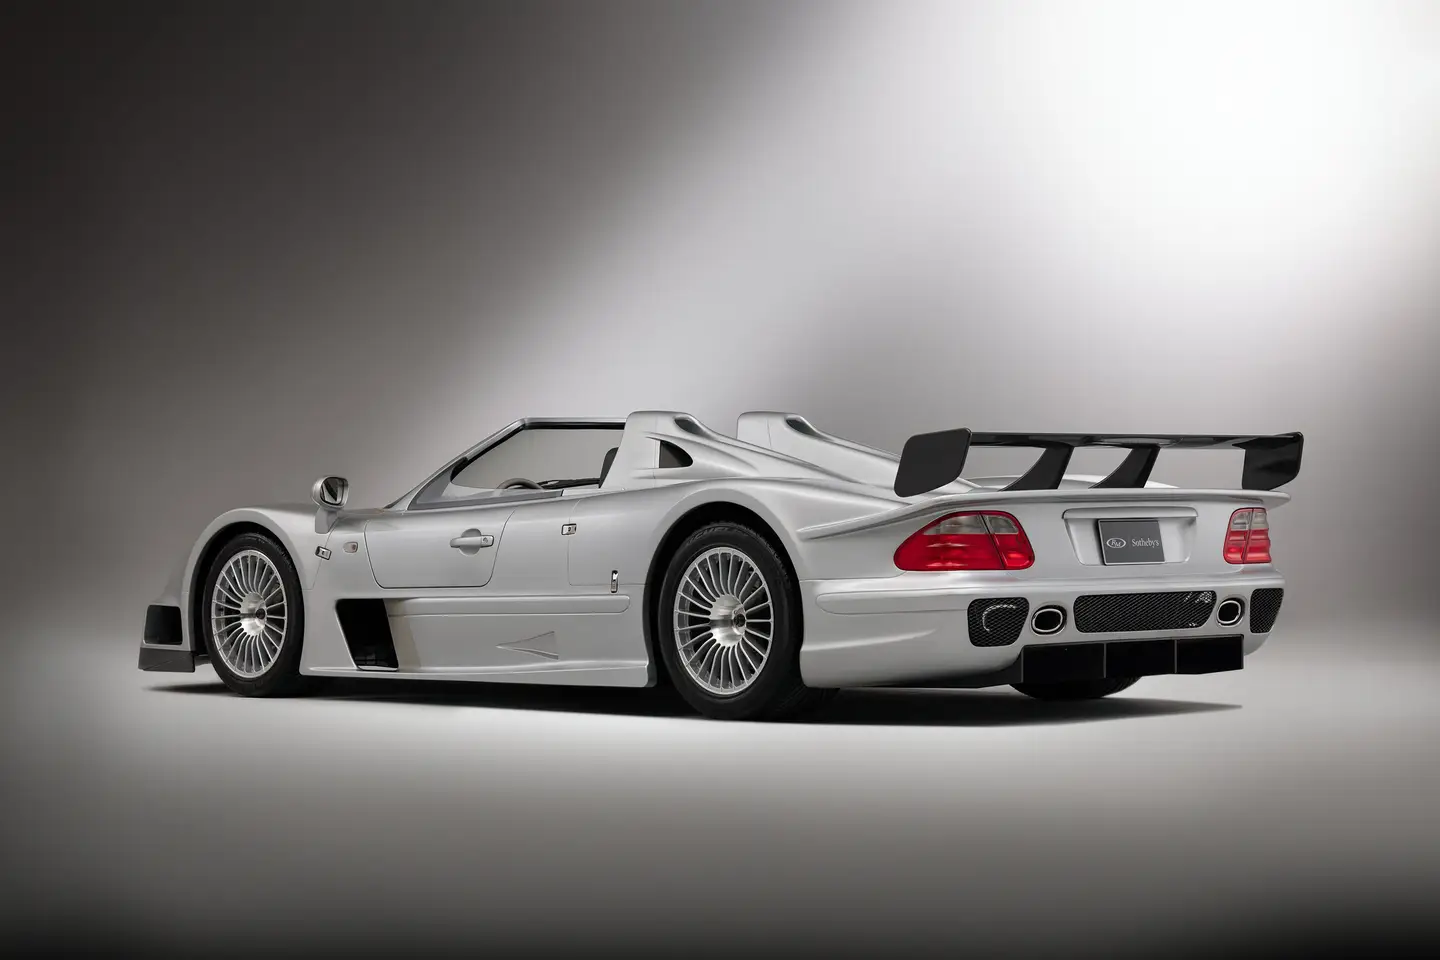 The Mercedes CLK GTR Roadster for sale is a GT1 race car with an open-air cockpit
